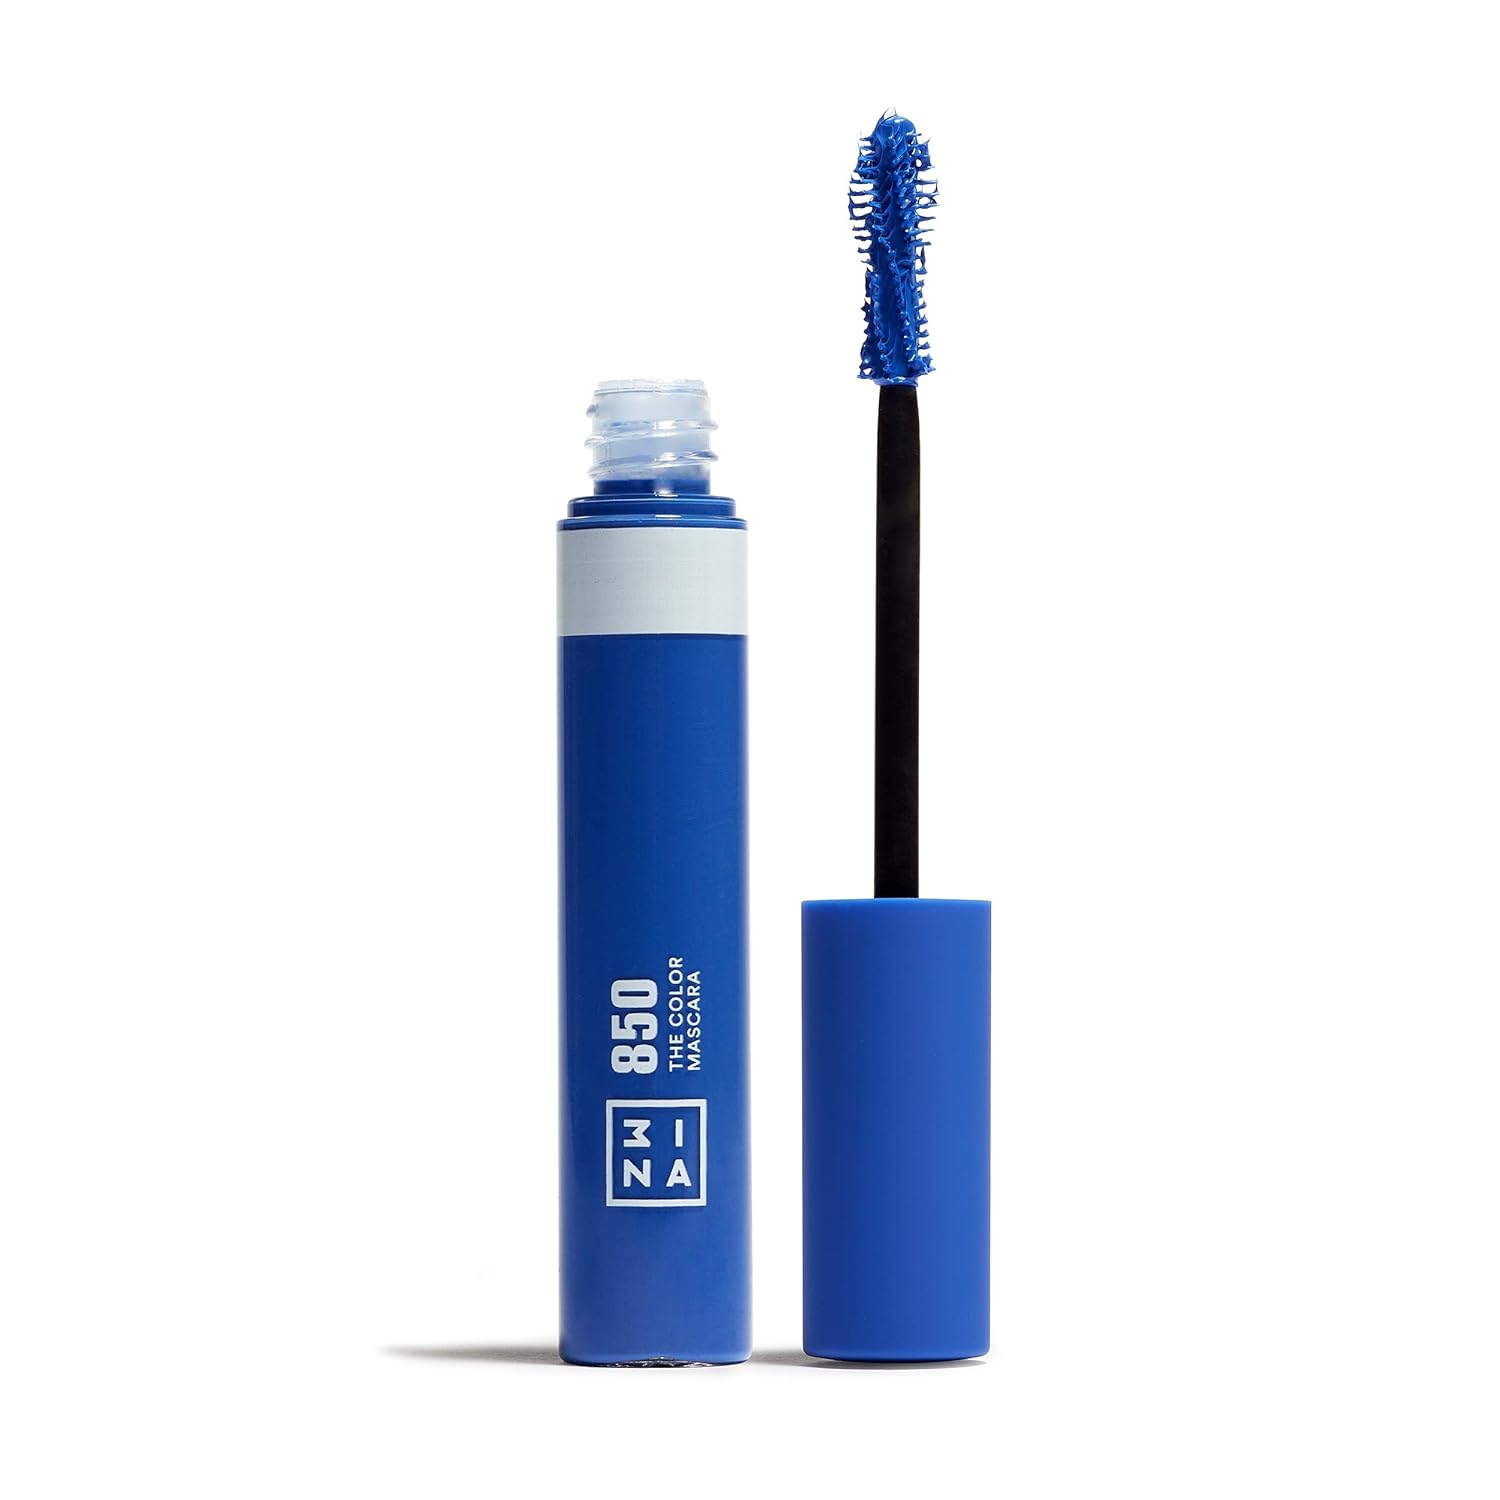 3INA MAKEUP Vegan The Color Mascara 850 Blue Volume and Length Colorful Mascara Highly Pigmented Vegetable Keratin Formula Long-Lasting for Sensitive Eyes Cruelty Free